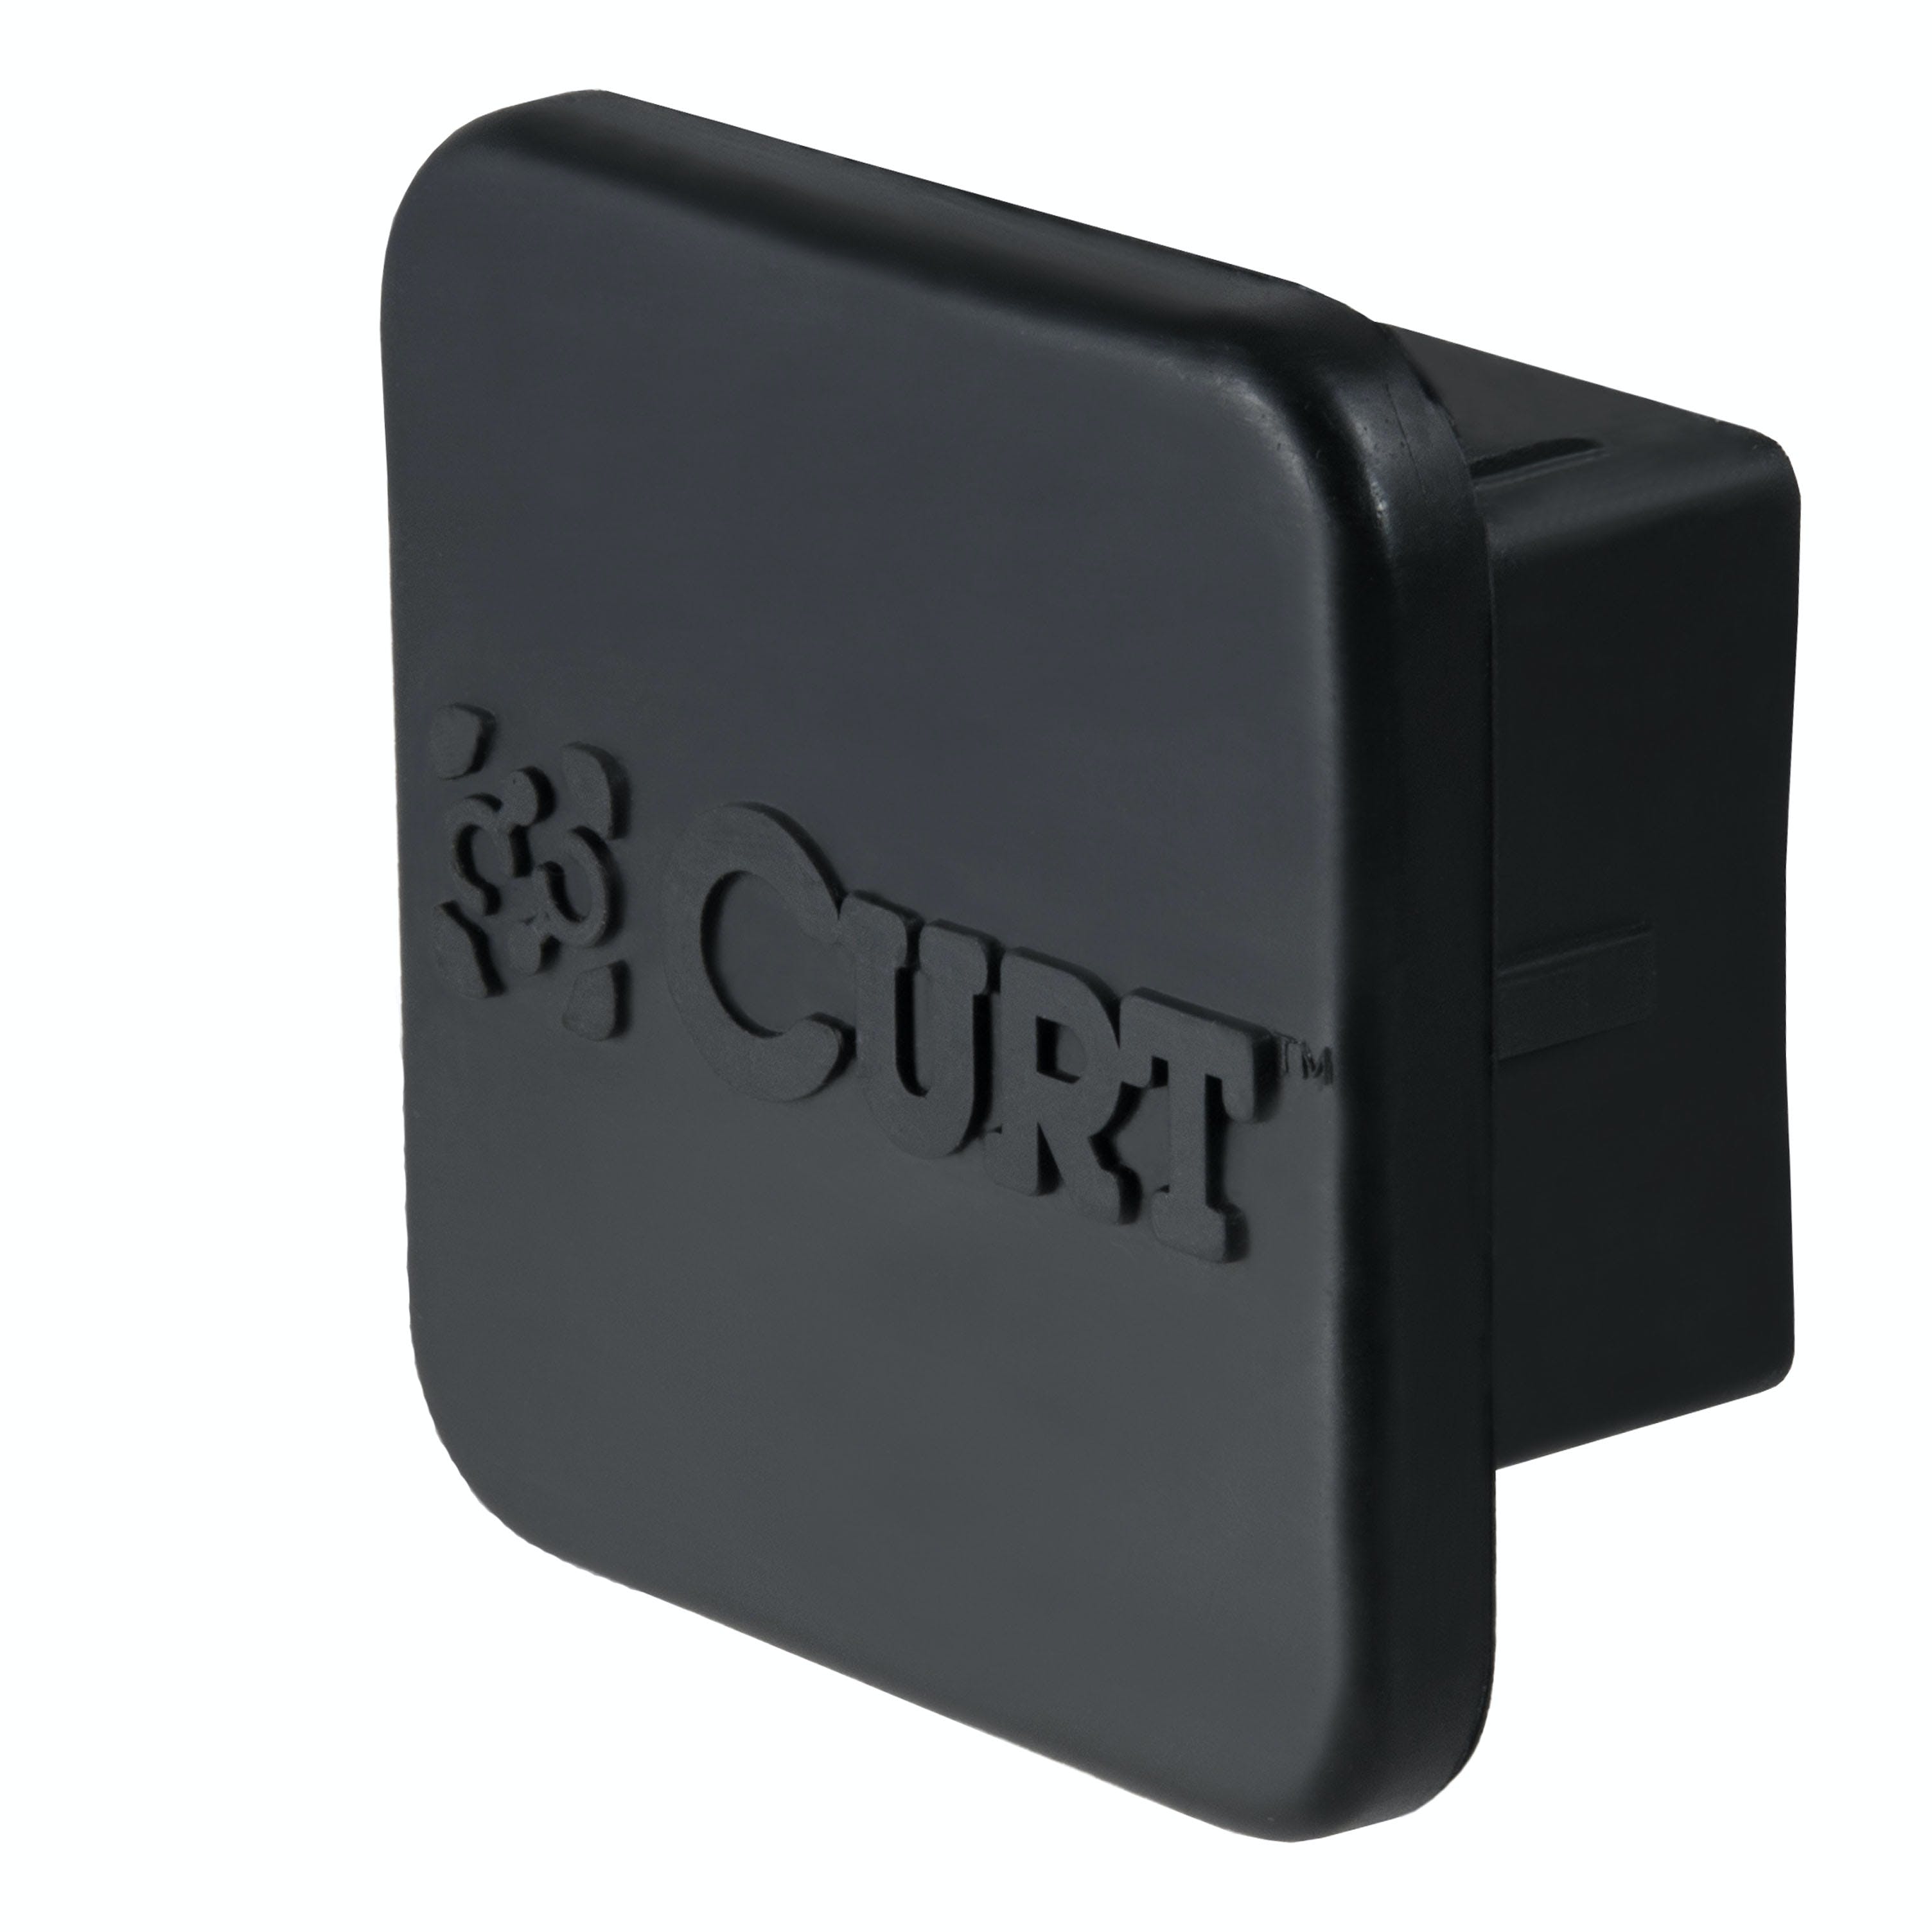 CURT 22276 2 Rubber Hitch Tube Cover (Packaged)